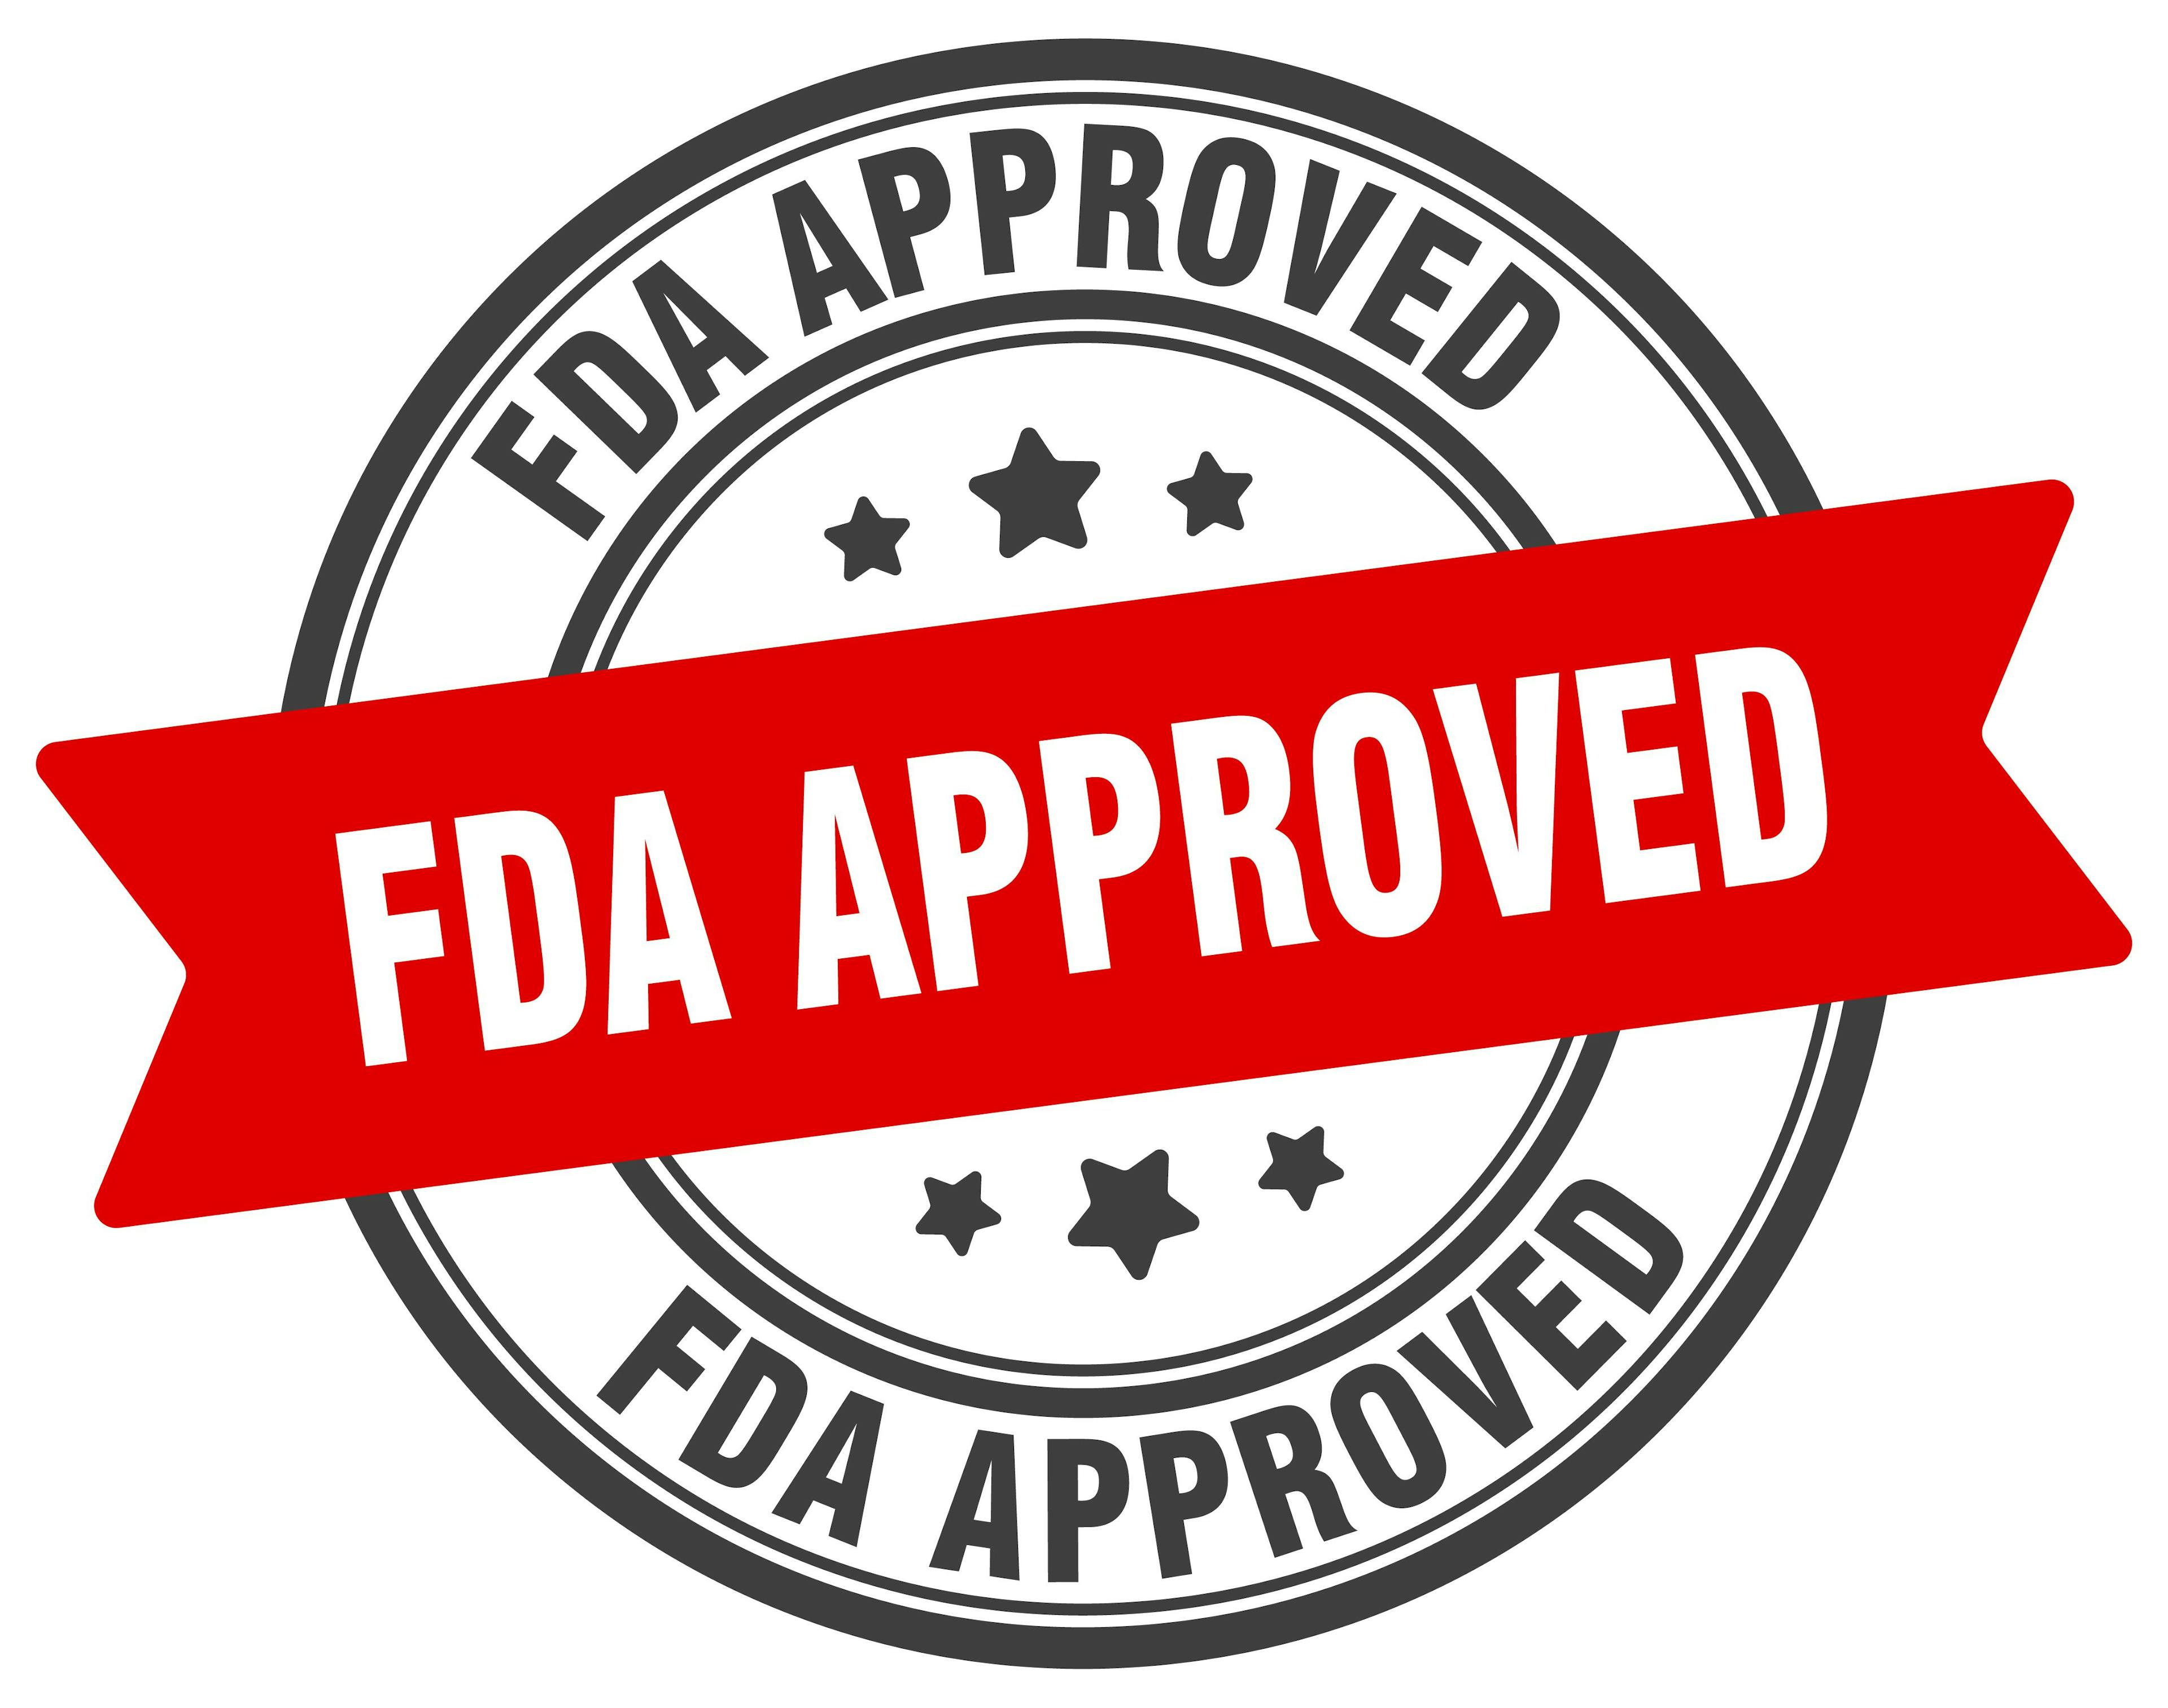 The FDA approved SH-105, an injectable drug for patients with breast and ovarian cancers. | Image Credit: BHM - stock.adobe.com